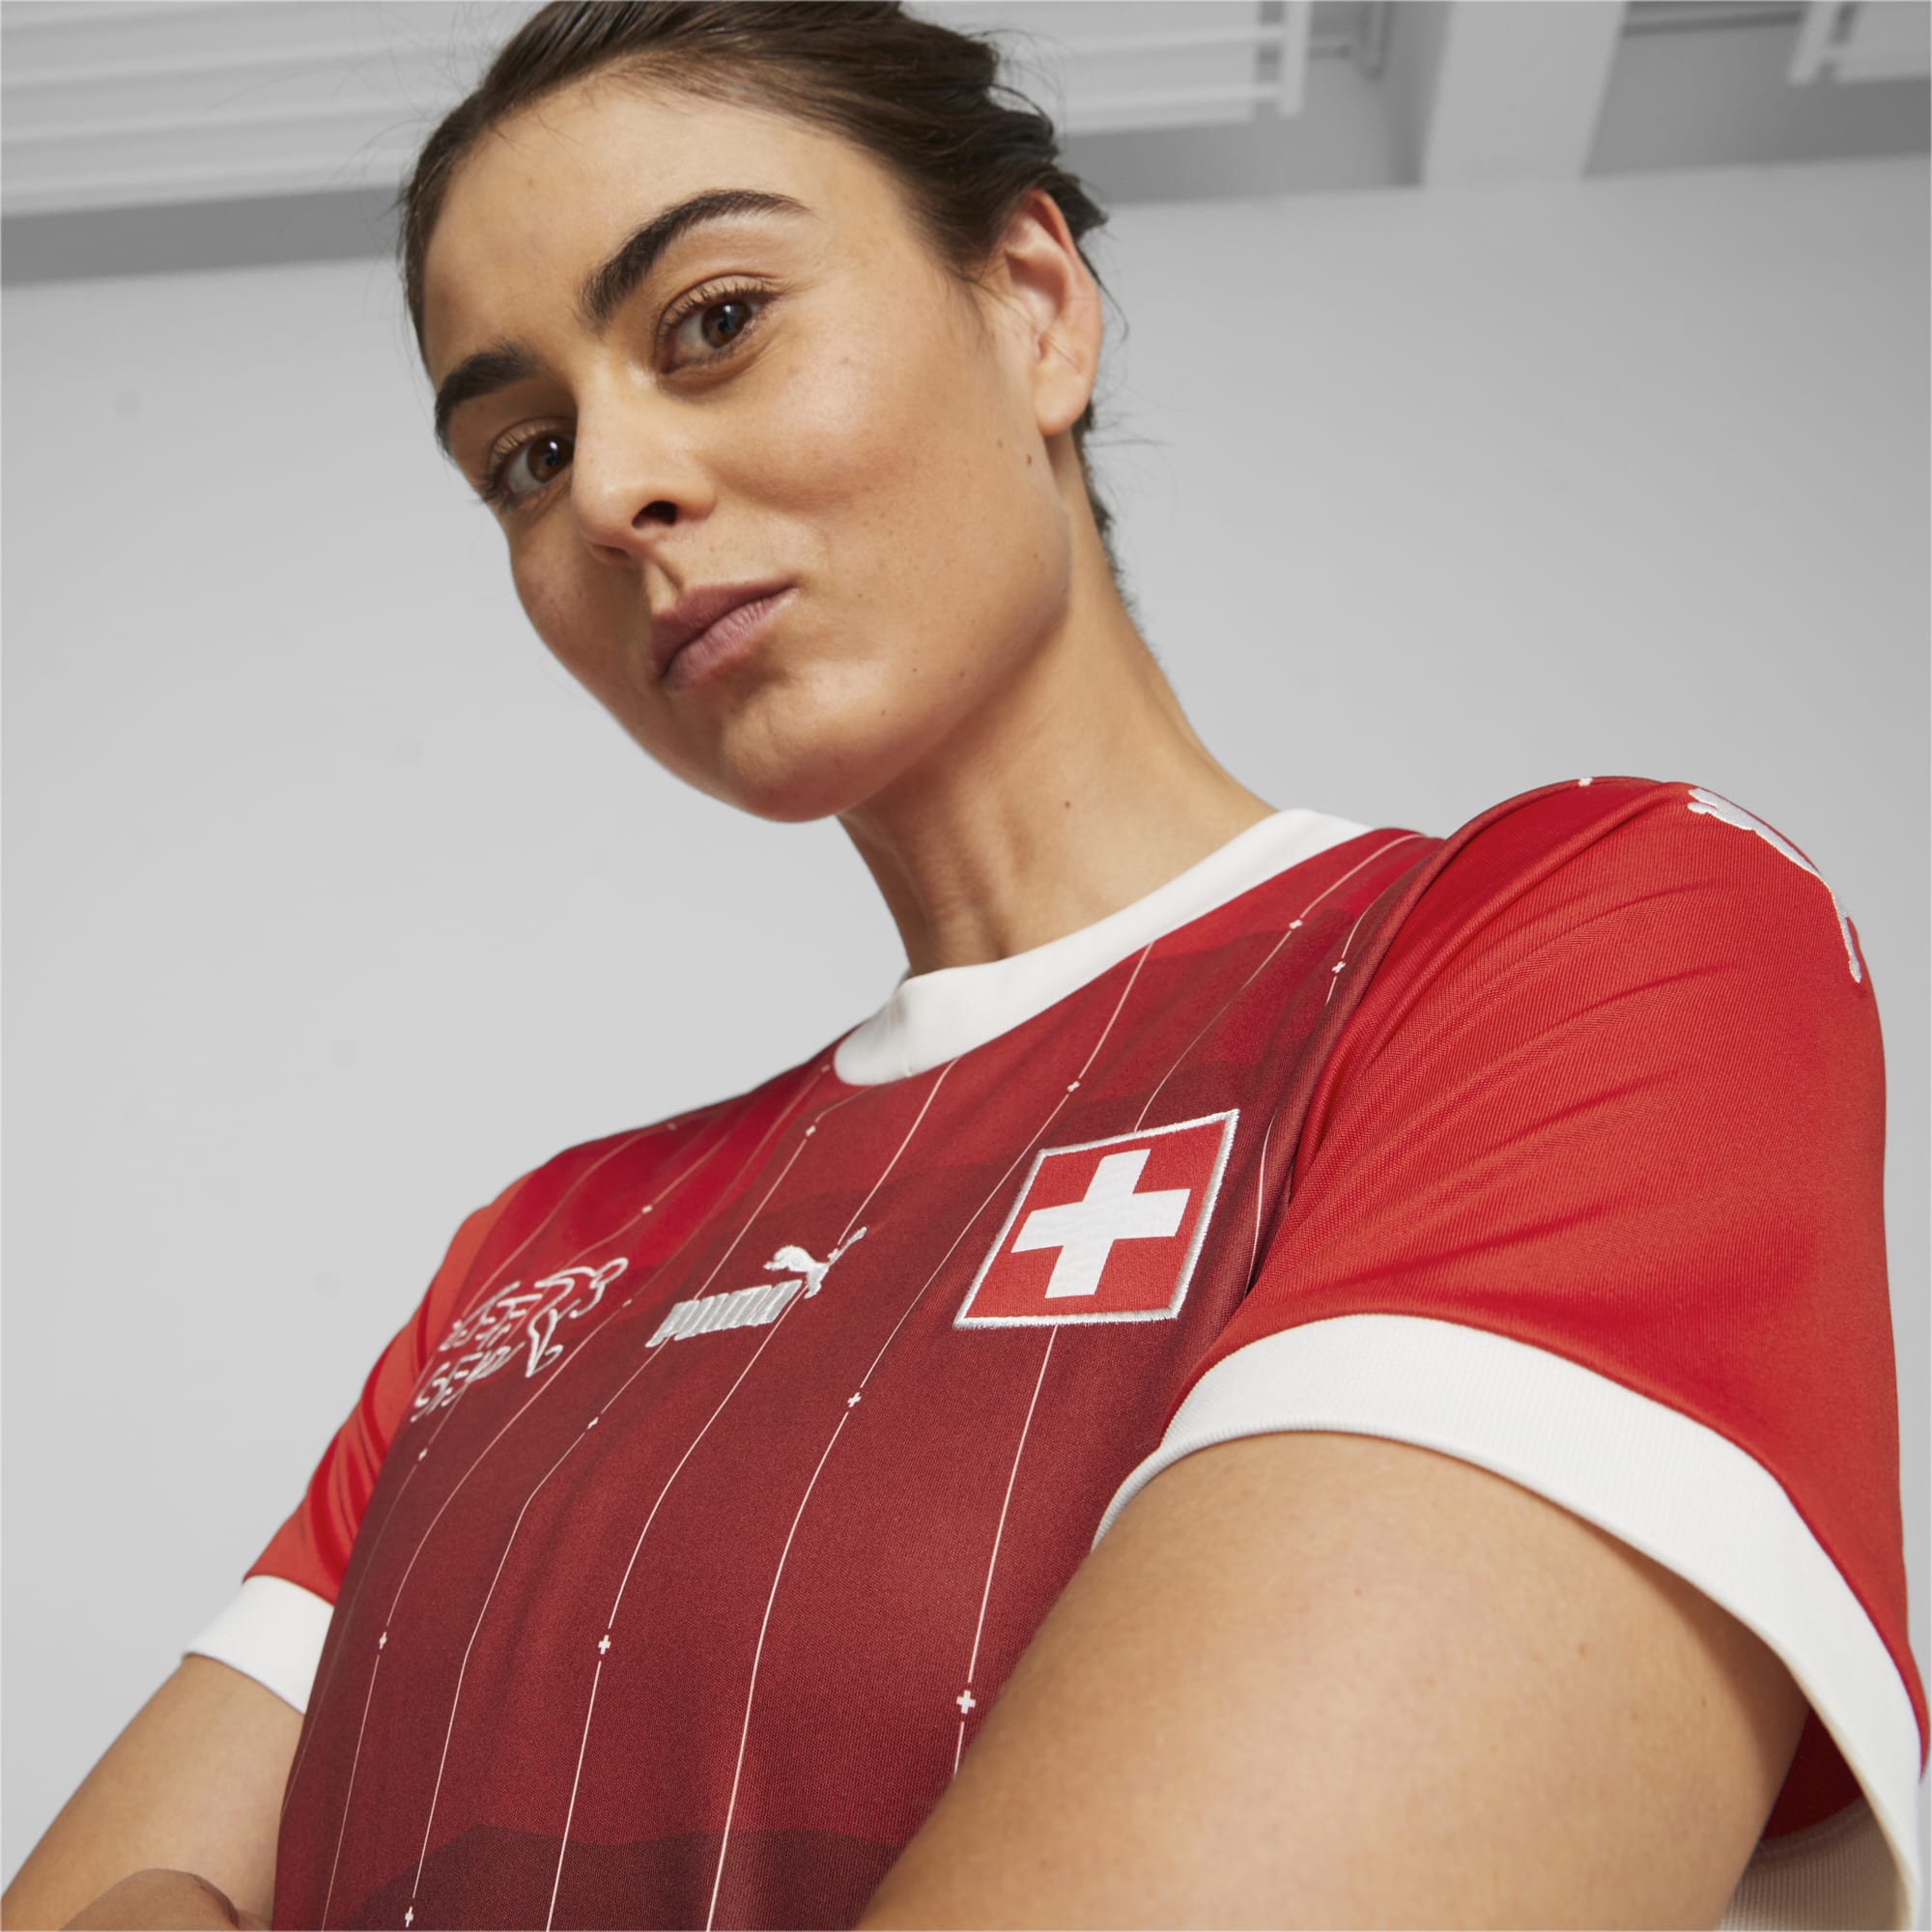 PUMA Switzerland 23/24 Women's World Cup Home Jersey, Red/White, Size S, Clothing